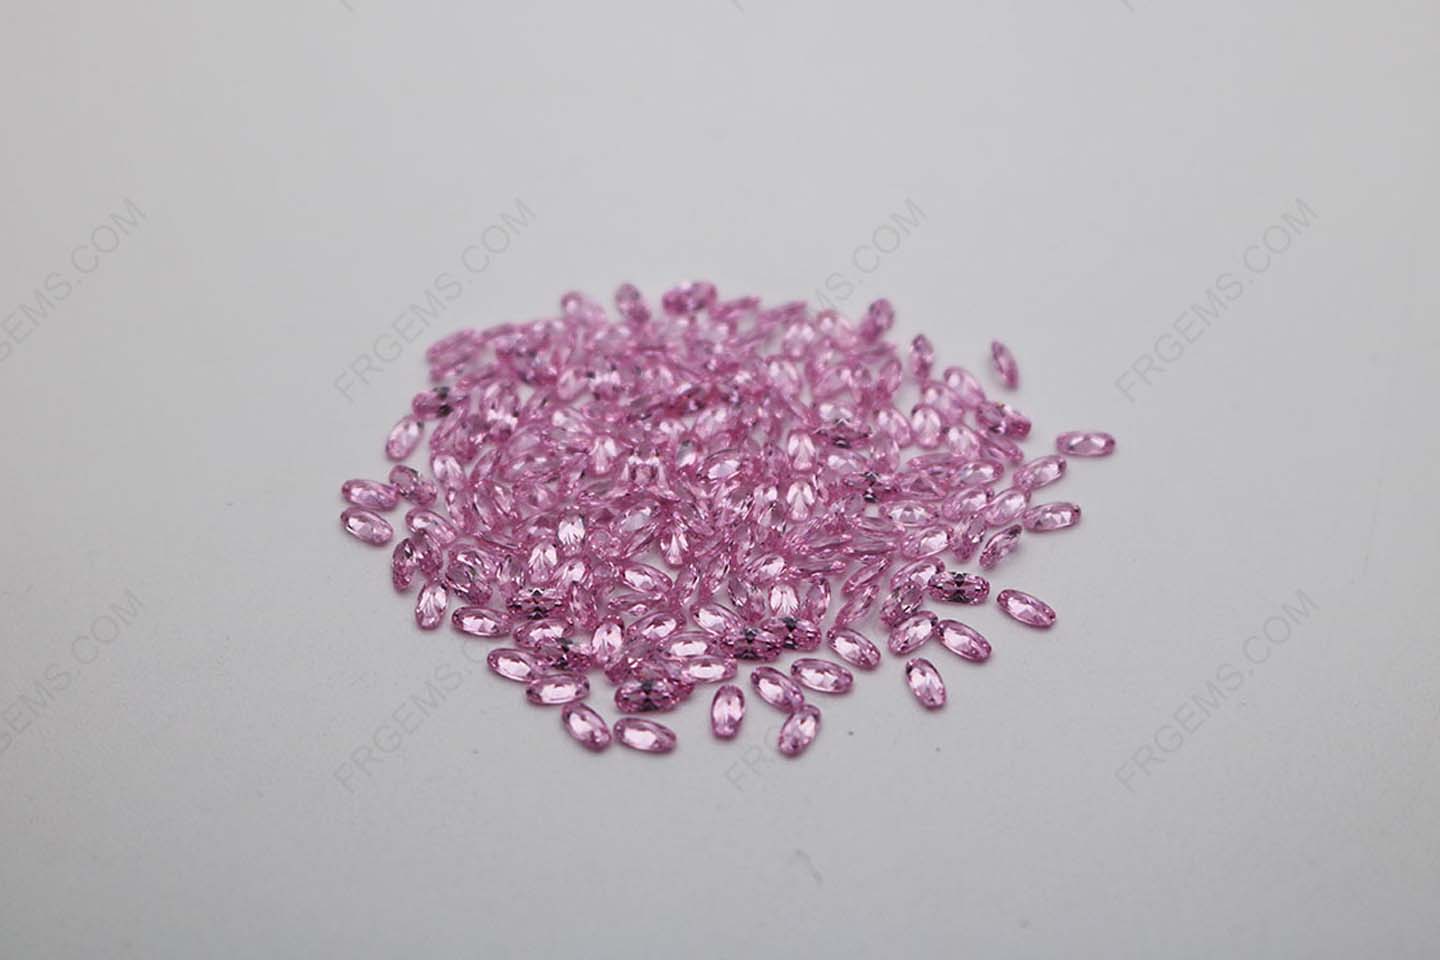 Cubic Zirconia Pink Oval Shape diamond faceted cut 4x2mm stones CZ03 IMG_1047